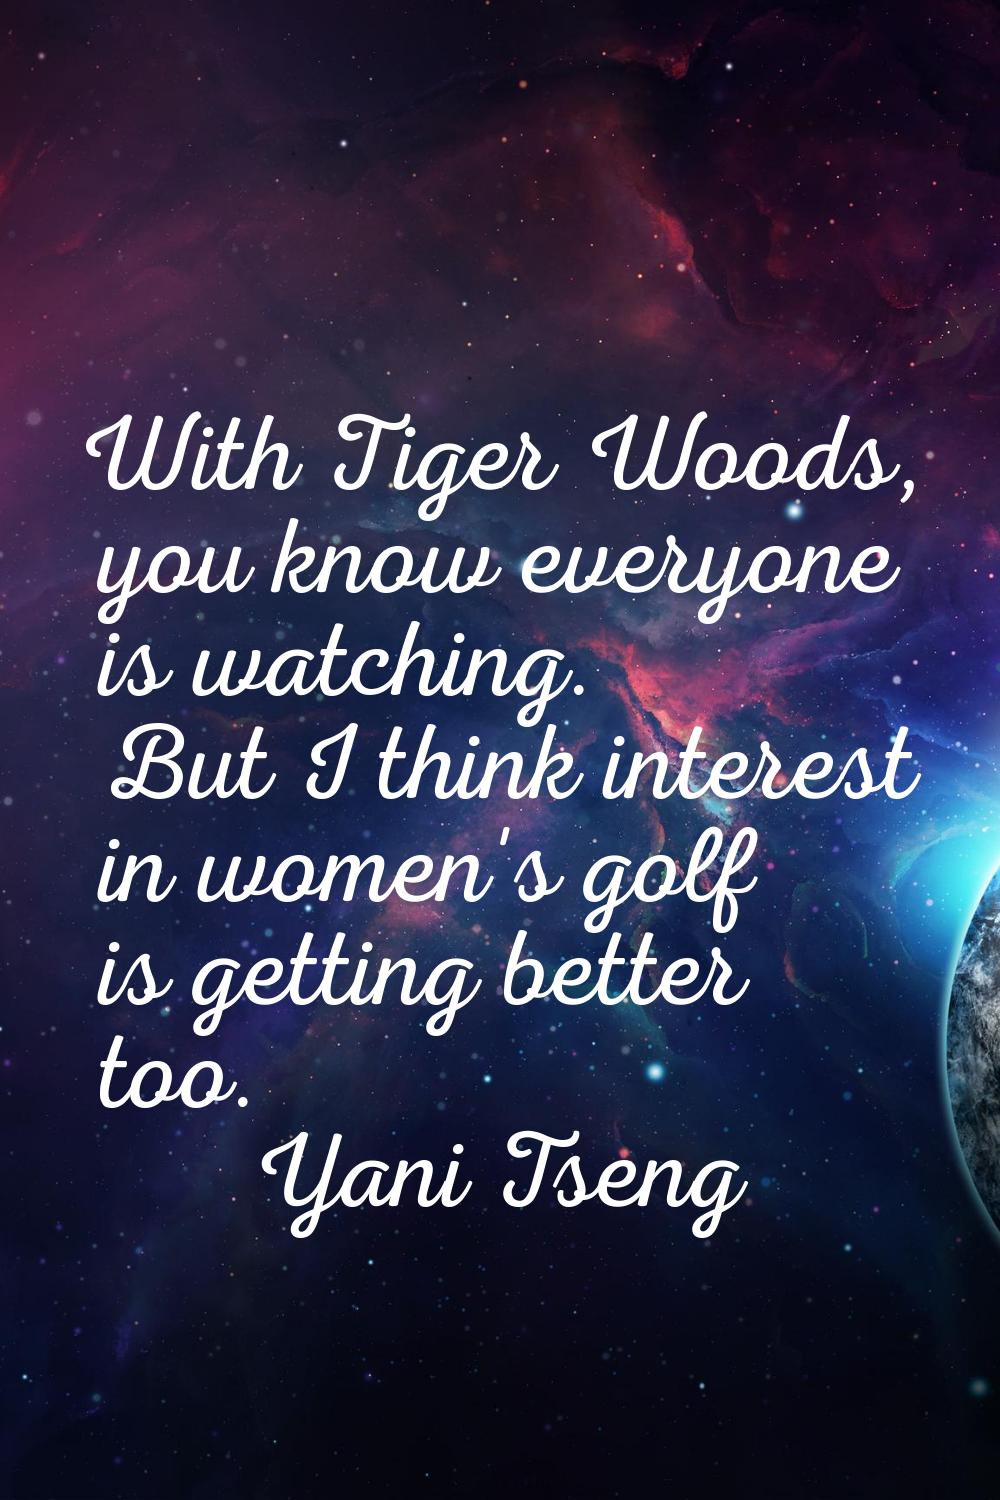 With Tiger Woods, you know everyone is watching. But I think interest in women's golf is getting be